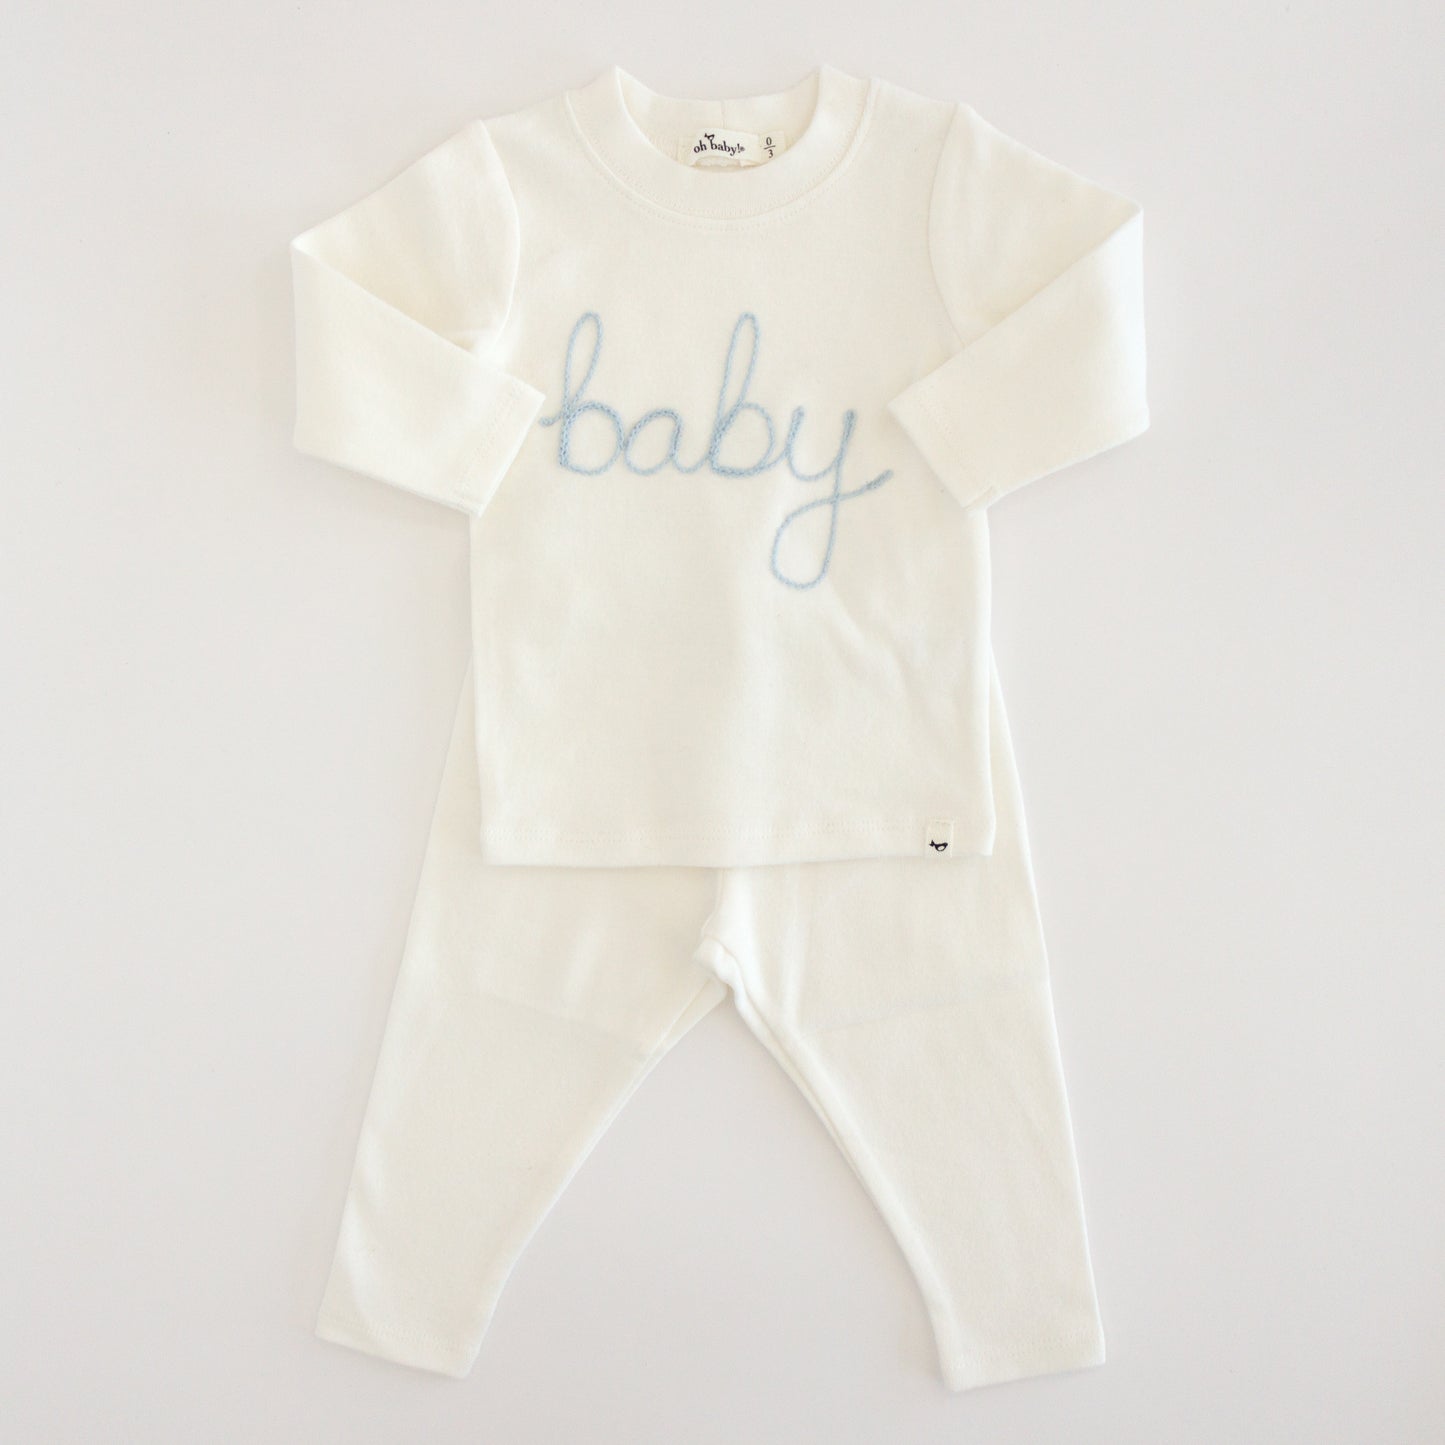 "Baby" Sky Embroidered 2PC Set